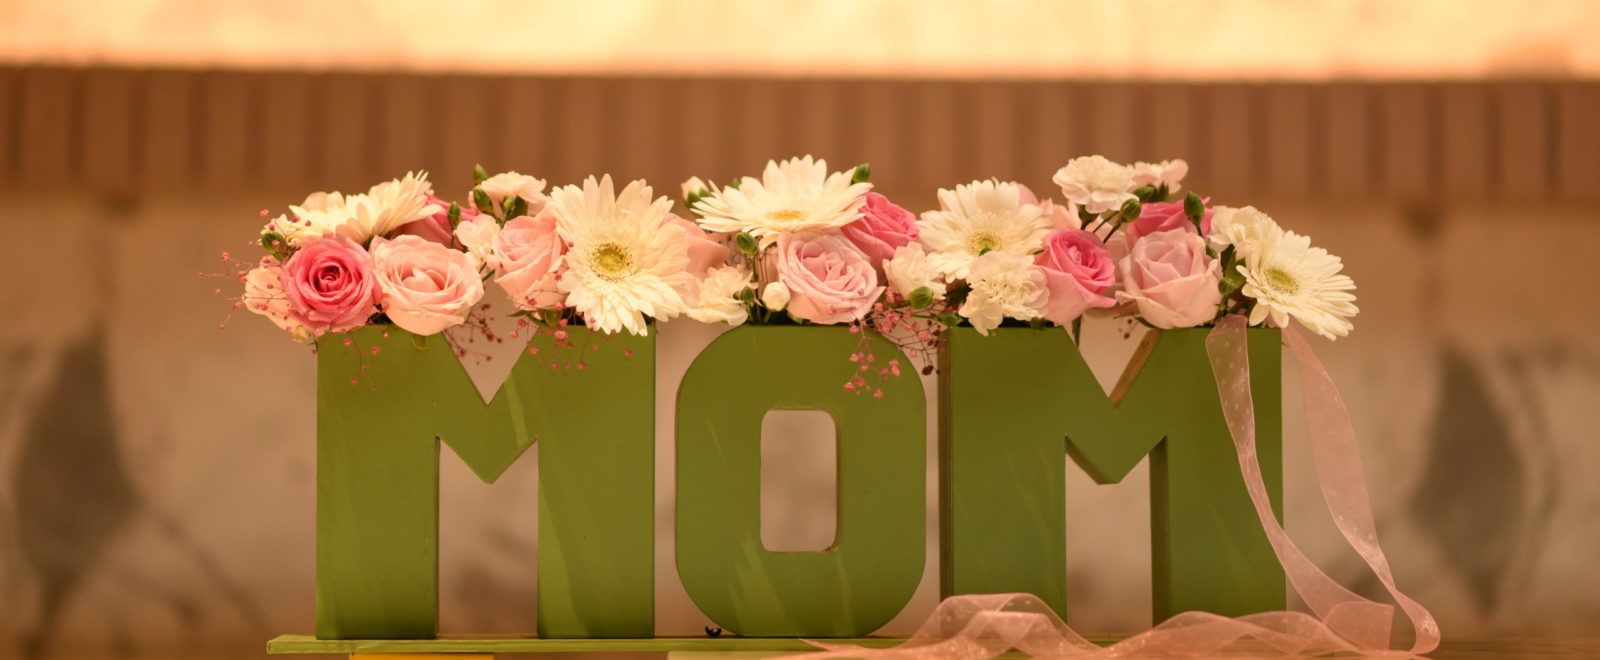 Mother’s Day: Treat your mom to special presents with the ultimate gifting guide